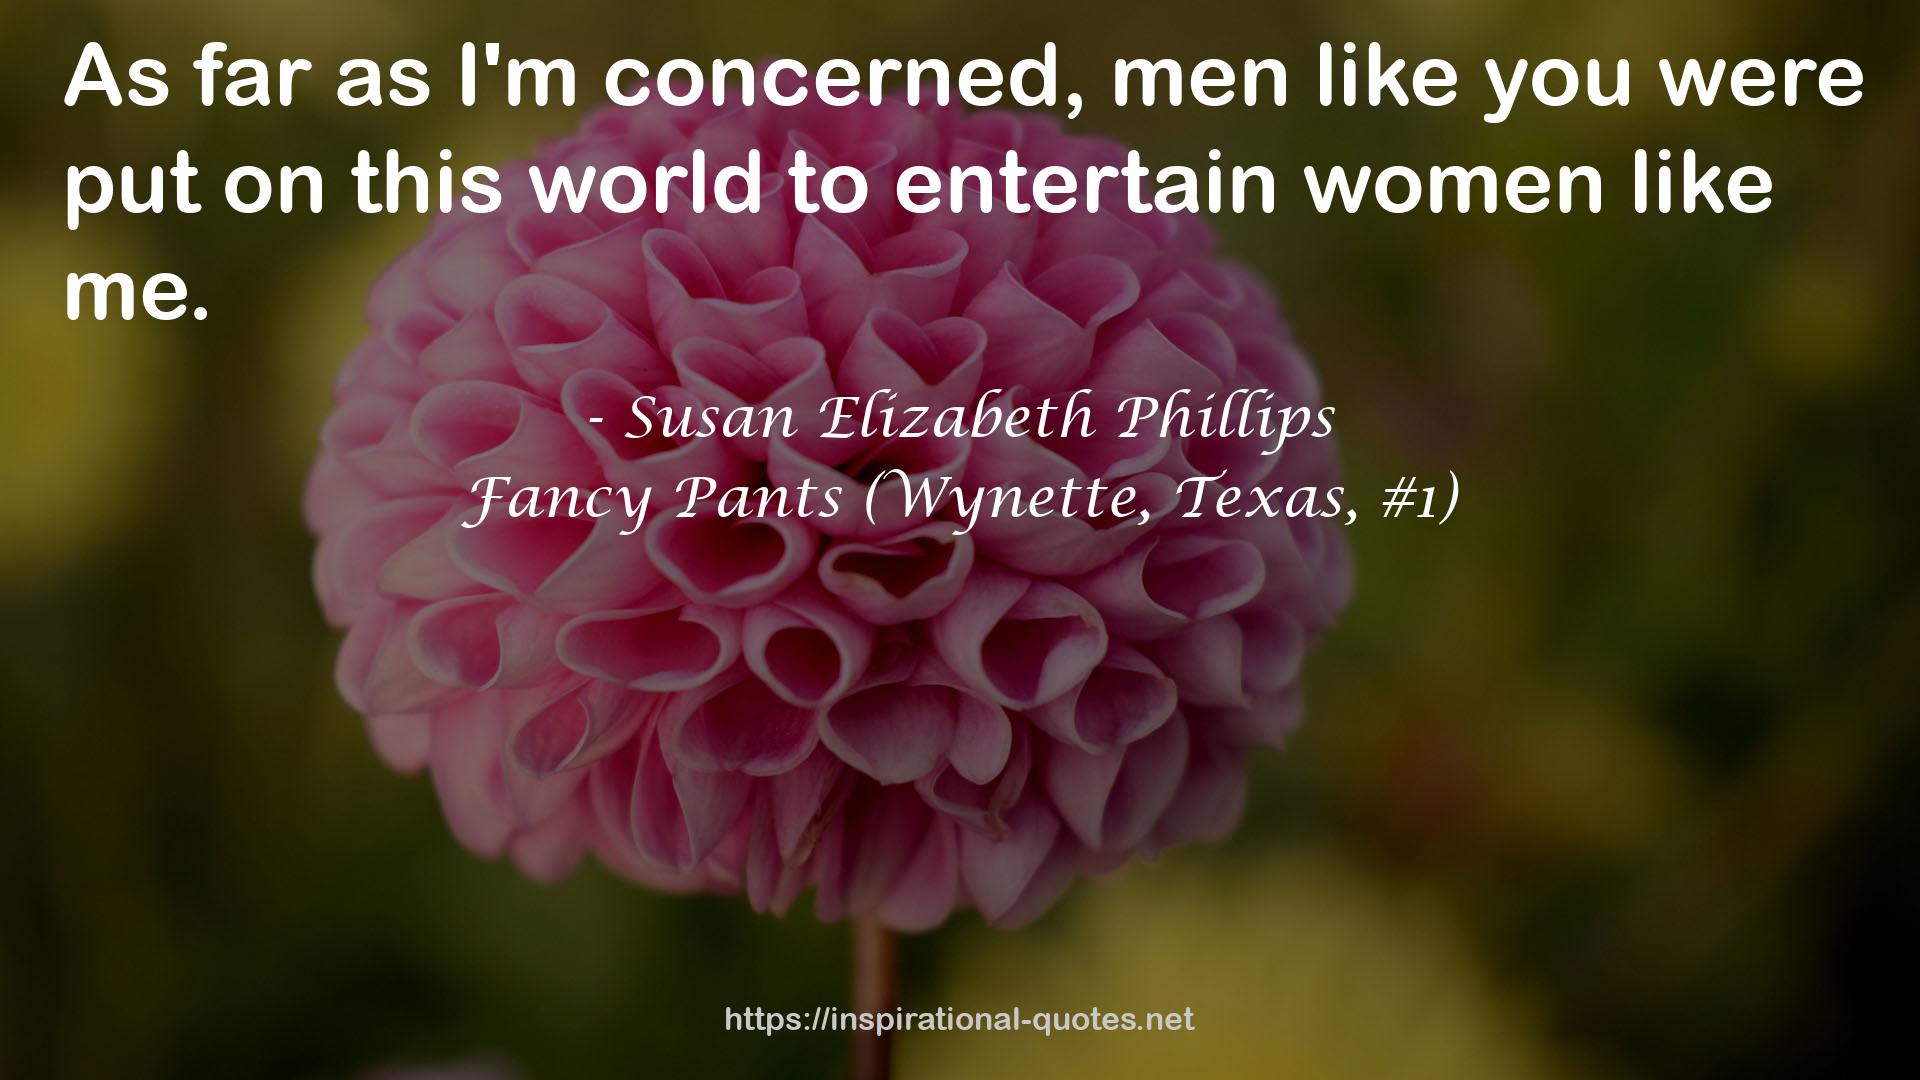 Fancy Pants (Wynette, Texas, #1) QUOTES